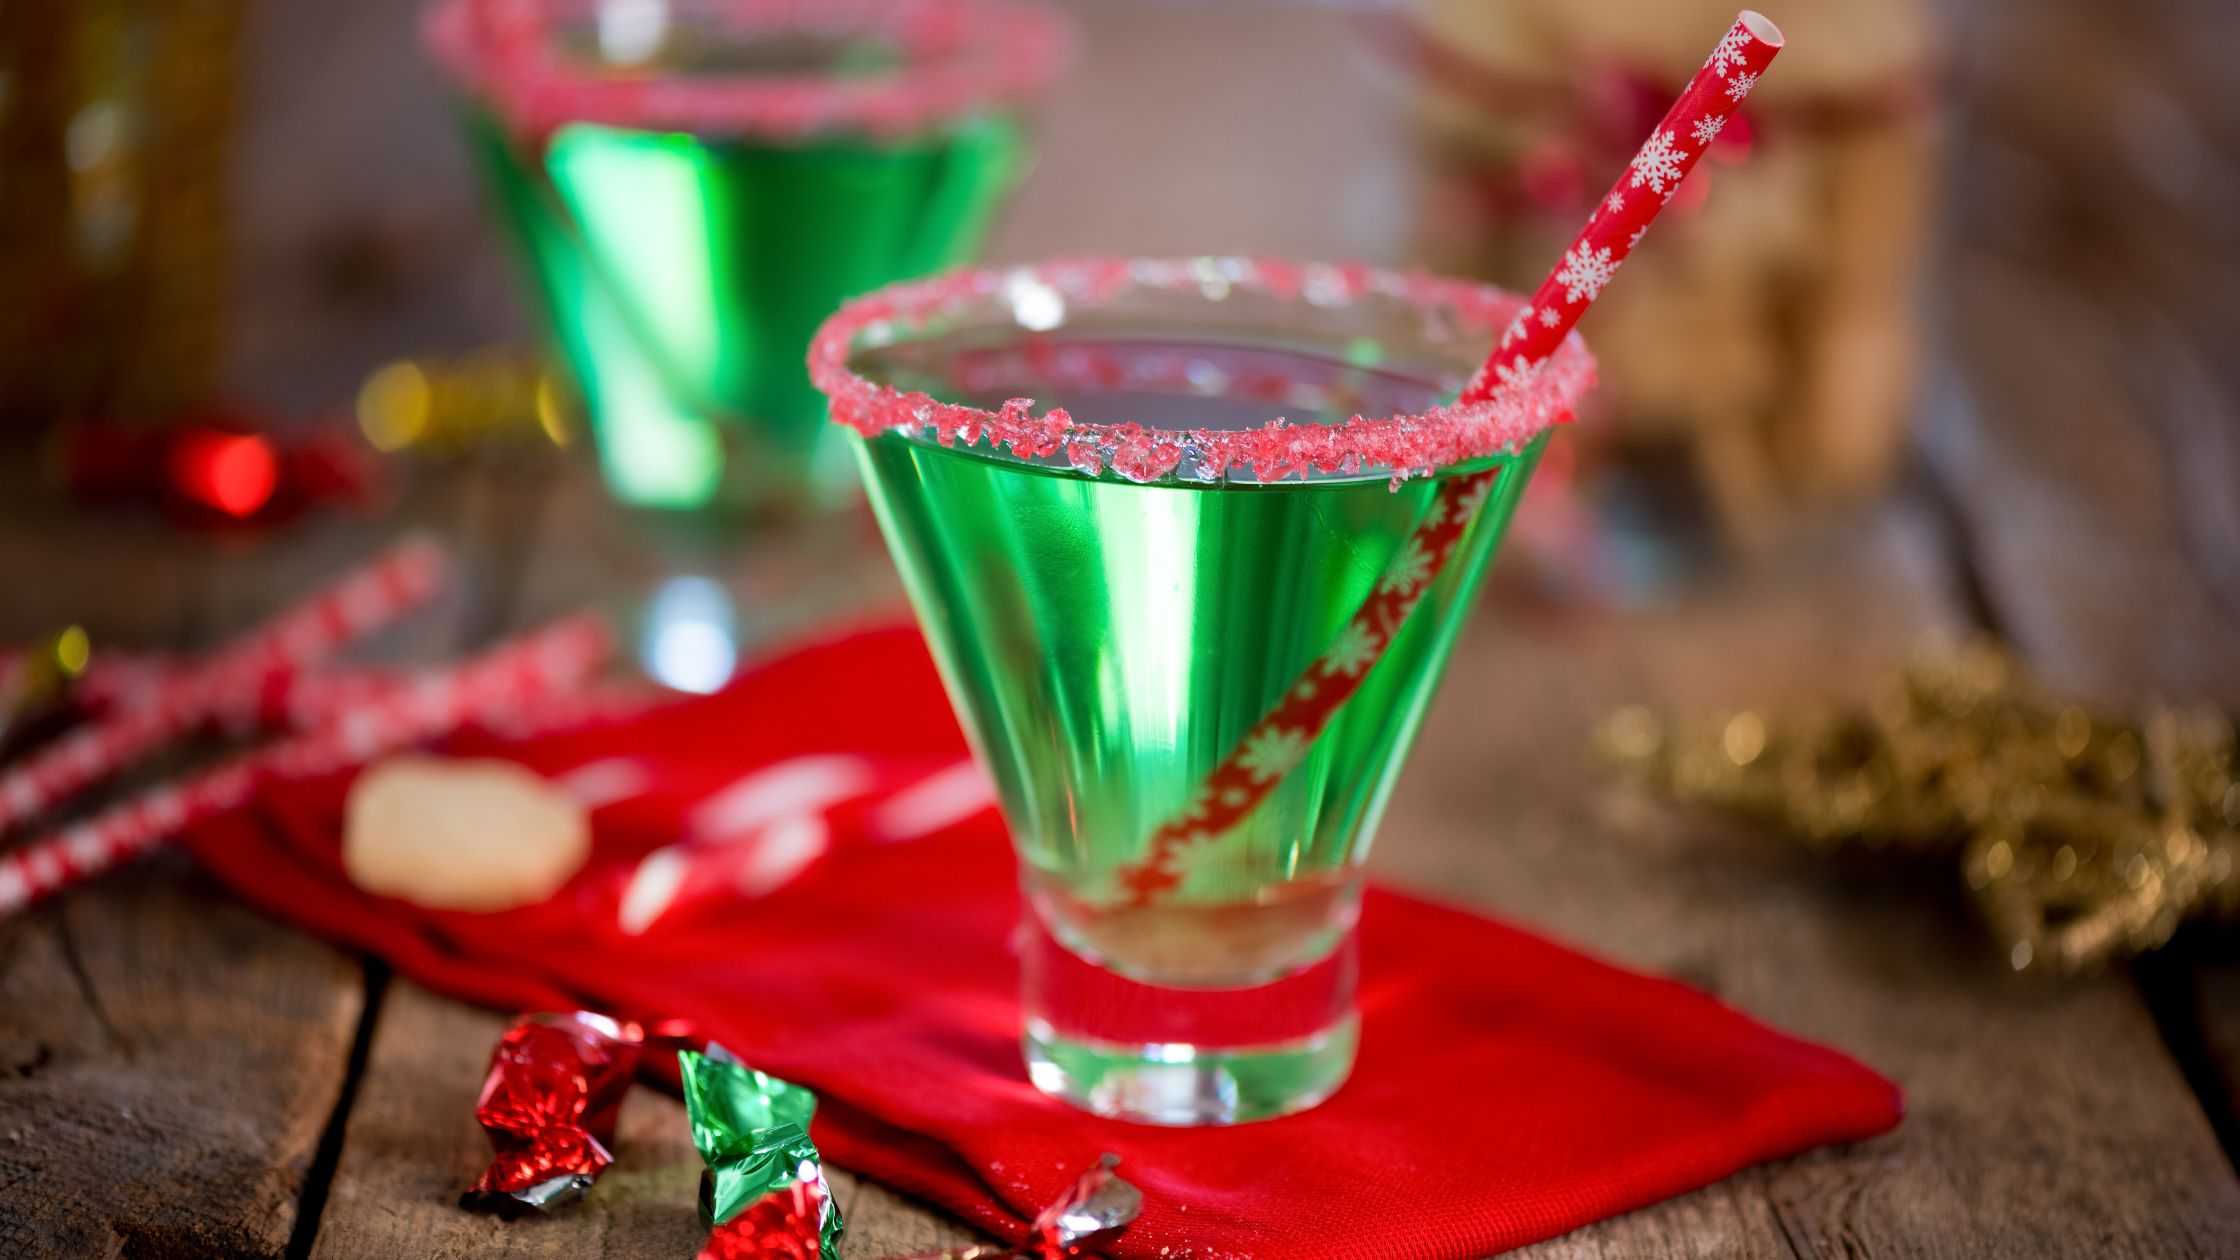 Green festive-looking drinks with red crystals around top and festive straw on red napkin.